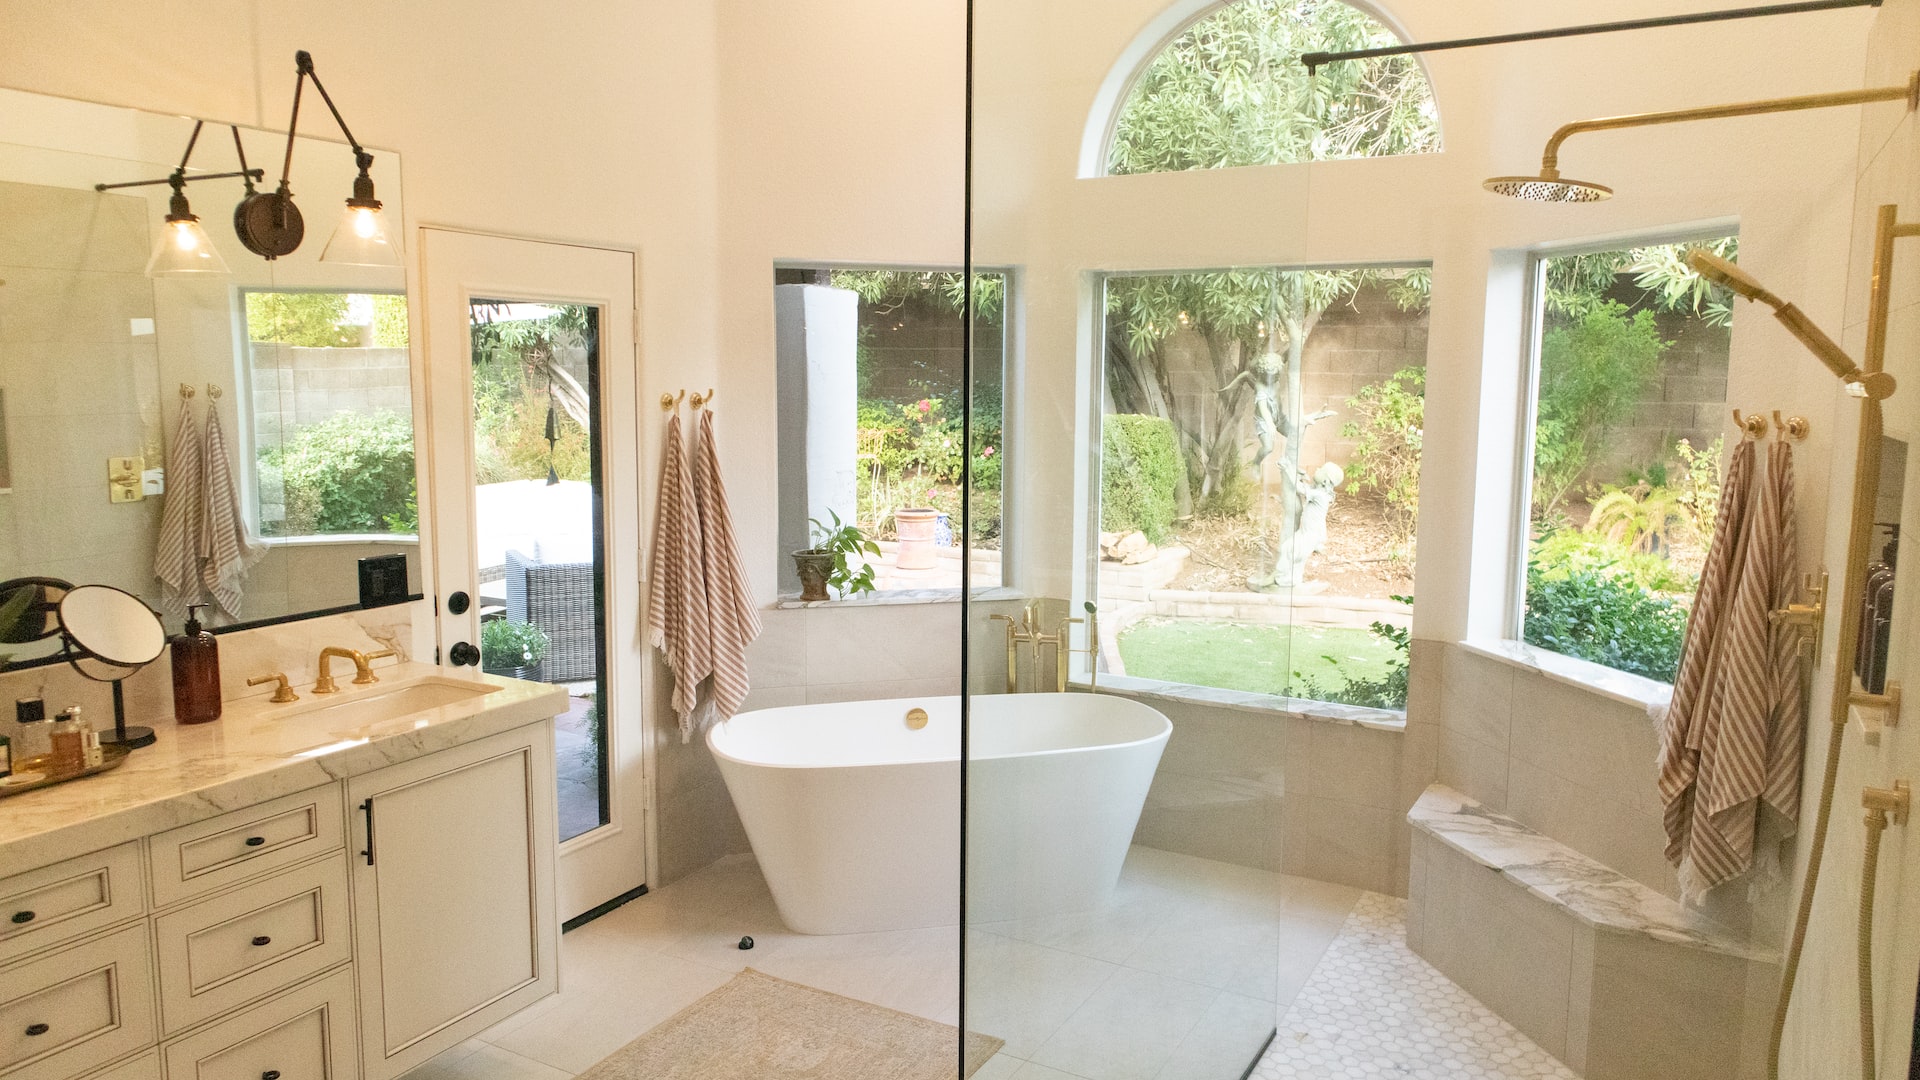 Types Of Bathtubs & Choosing The Right One For Your Bathroom